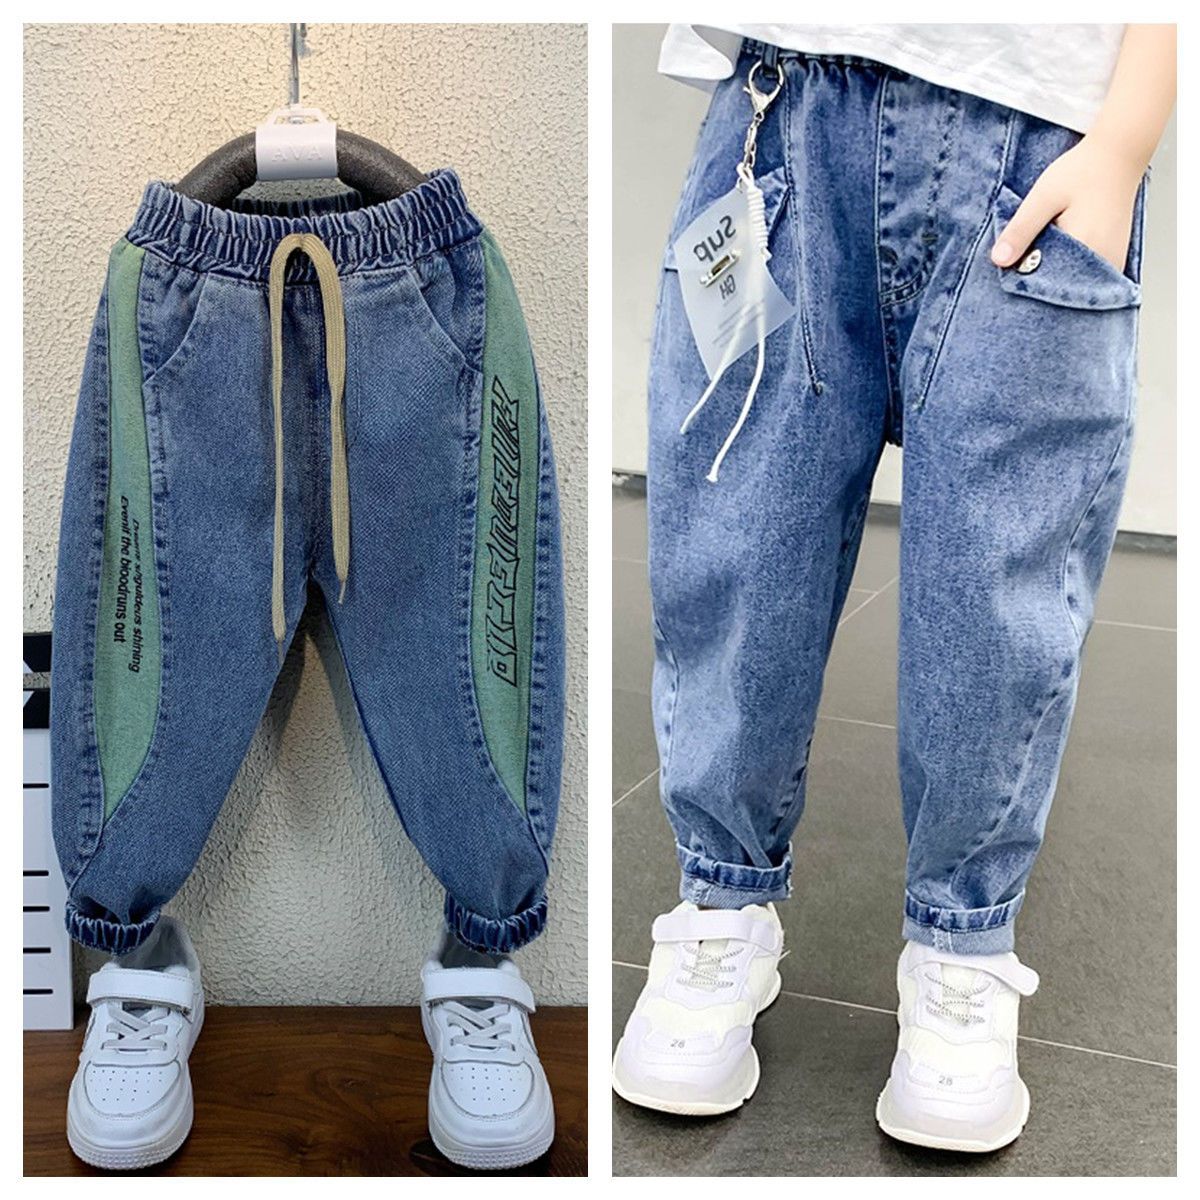 Boys' jeans spring children's loose and handsome pants spring and autumn Western elastic casual pants Korean pants